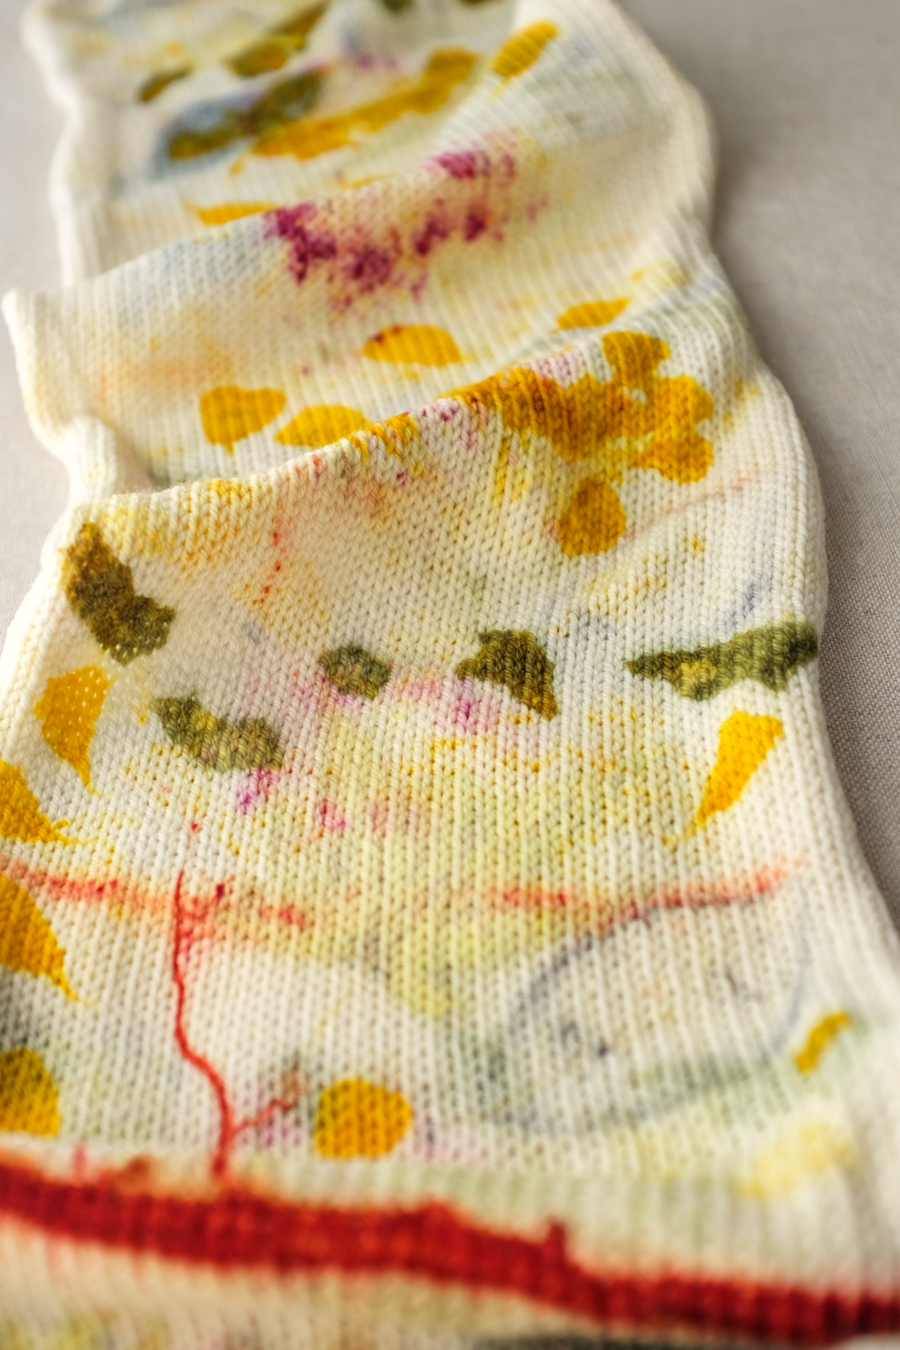 Ecoprinting a Sock Blank with Plants - Friday, March 22 & Saturday, March 23